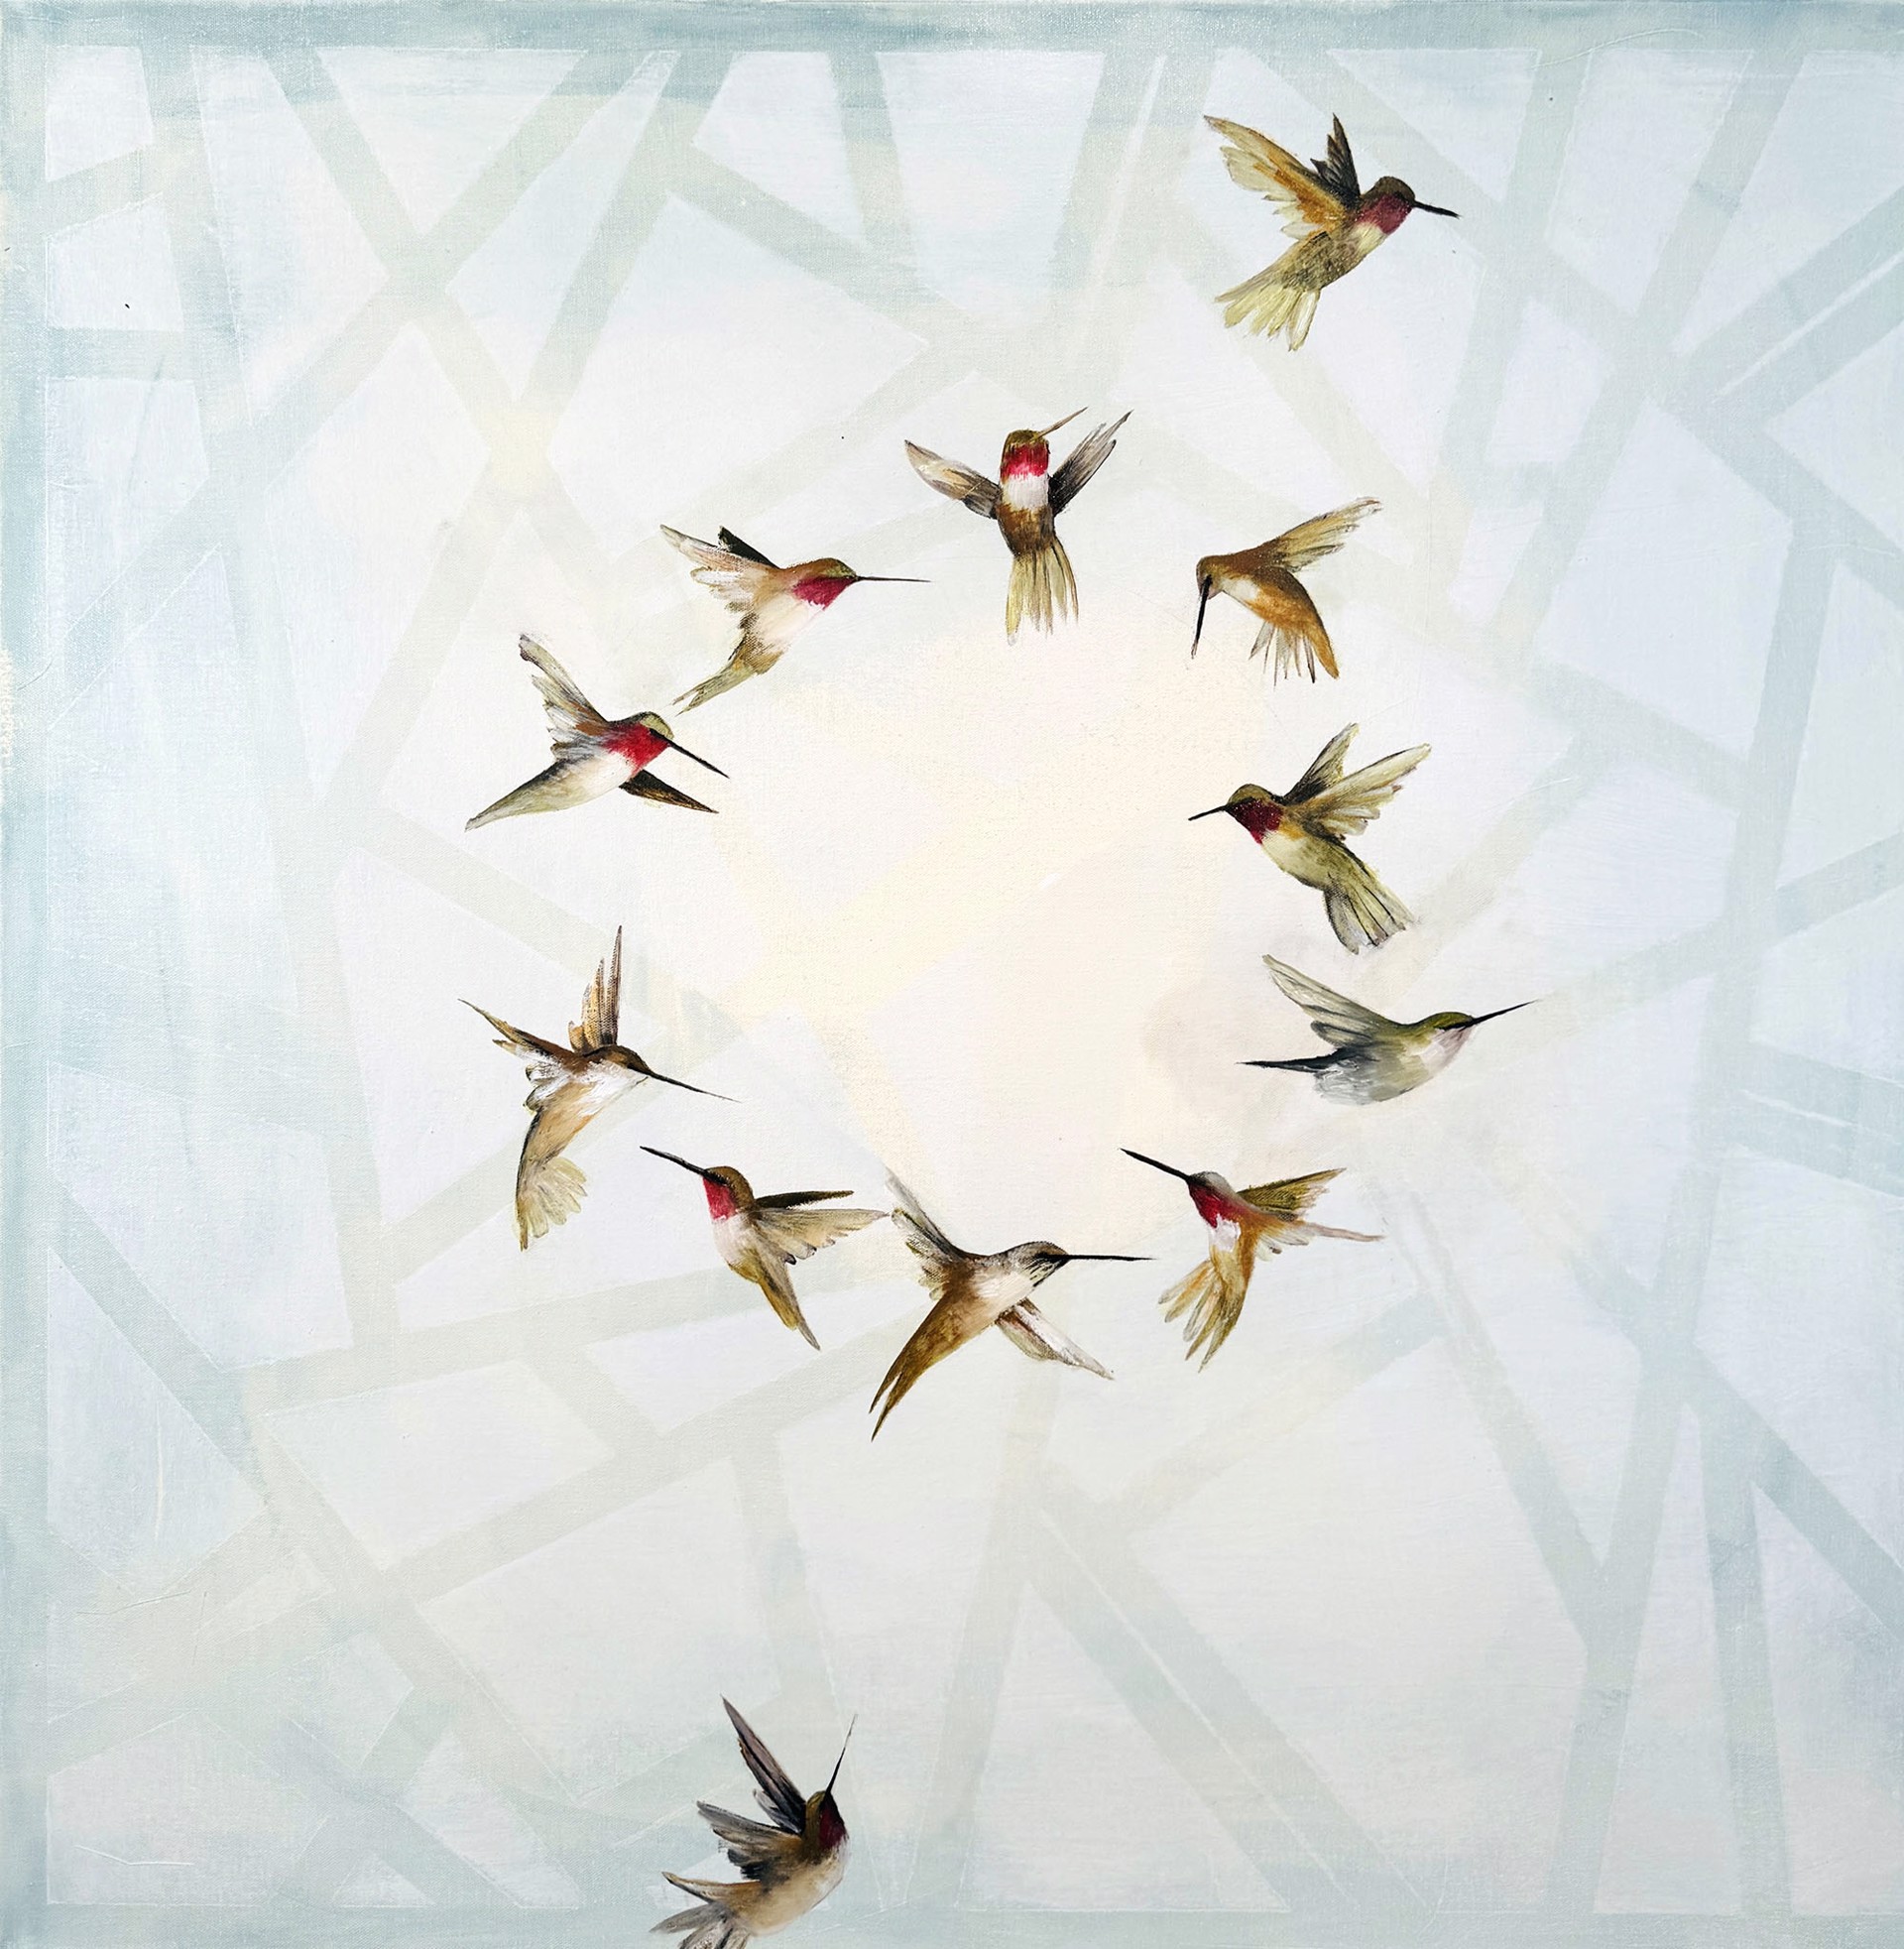 Original Oil Painting By Jenna Von Benedikt Featuring A Group Of Hummingbirds Flying In A Circular Formation On Abstract Background With Geometric Details In Soft Blue